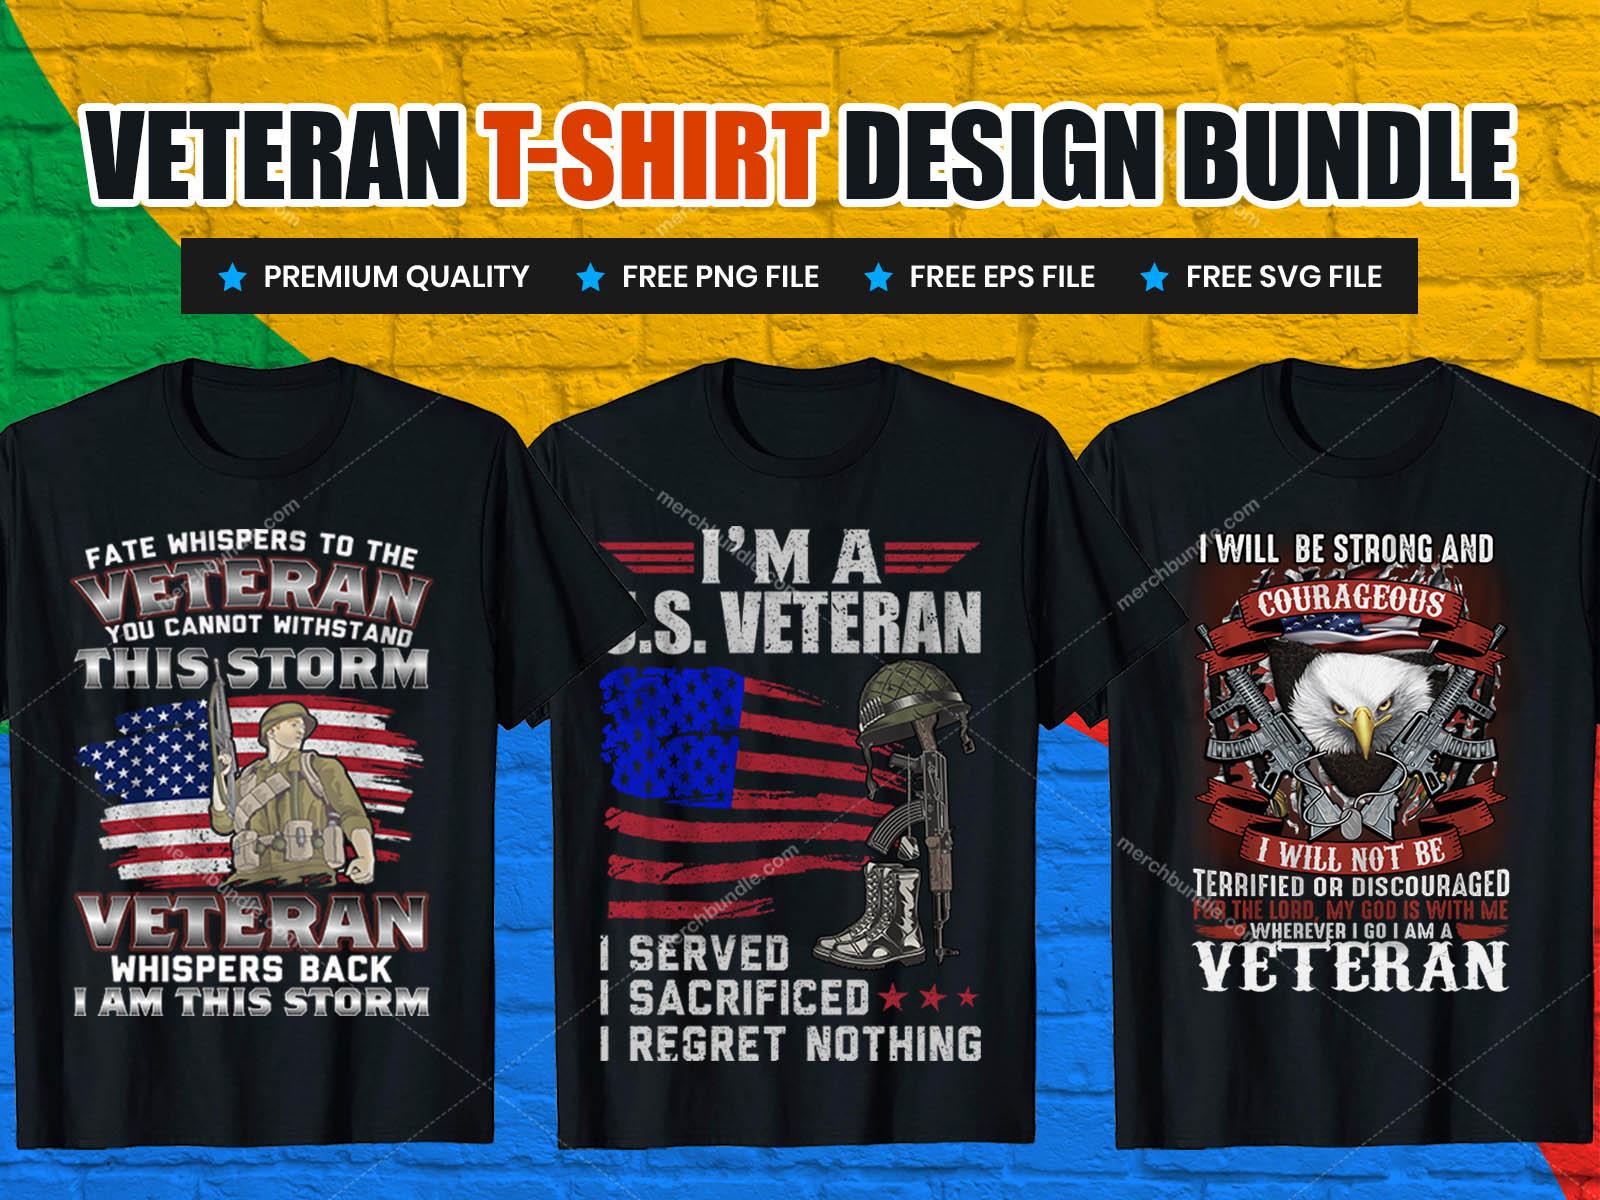 Veterans day print ready vector t shirt design. American flag with Veterans vector illustration.Pair of combat boots, military helmet and USA flag, vintage t shirt design vector. Memorial day t-shirt 